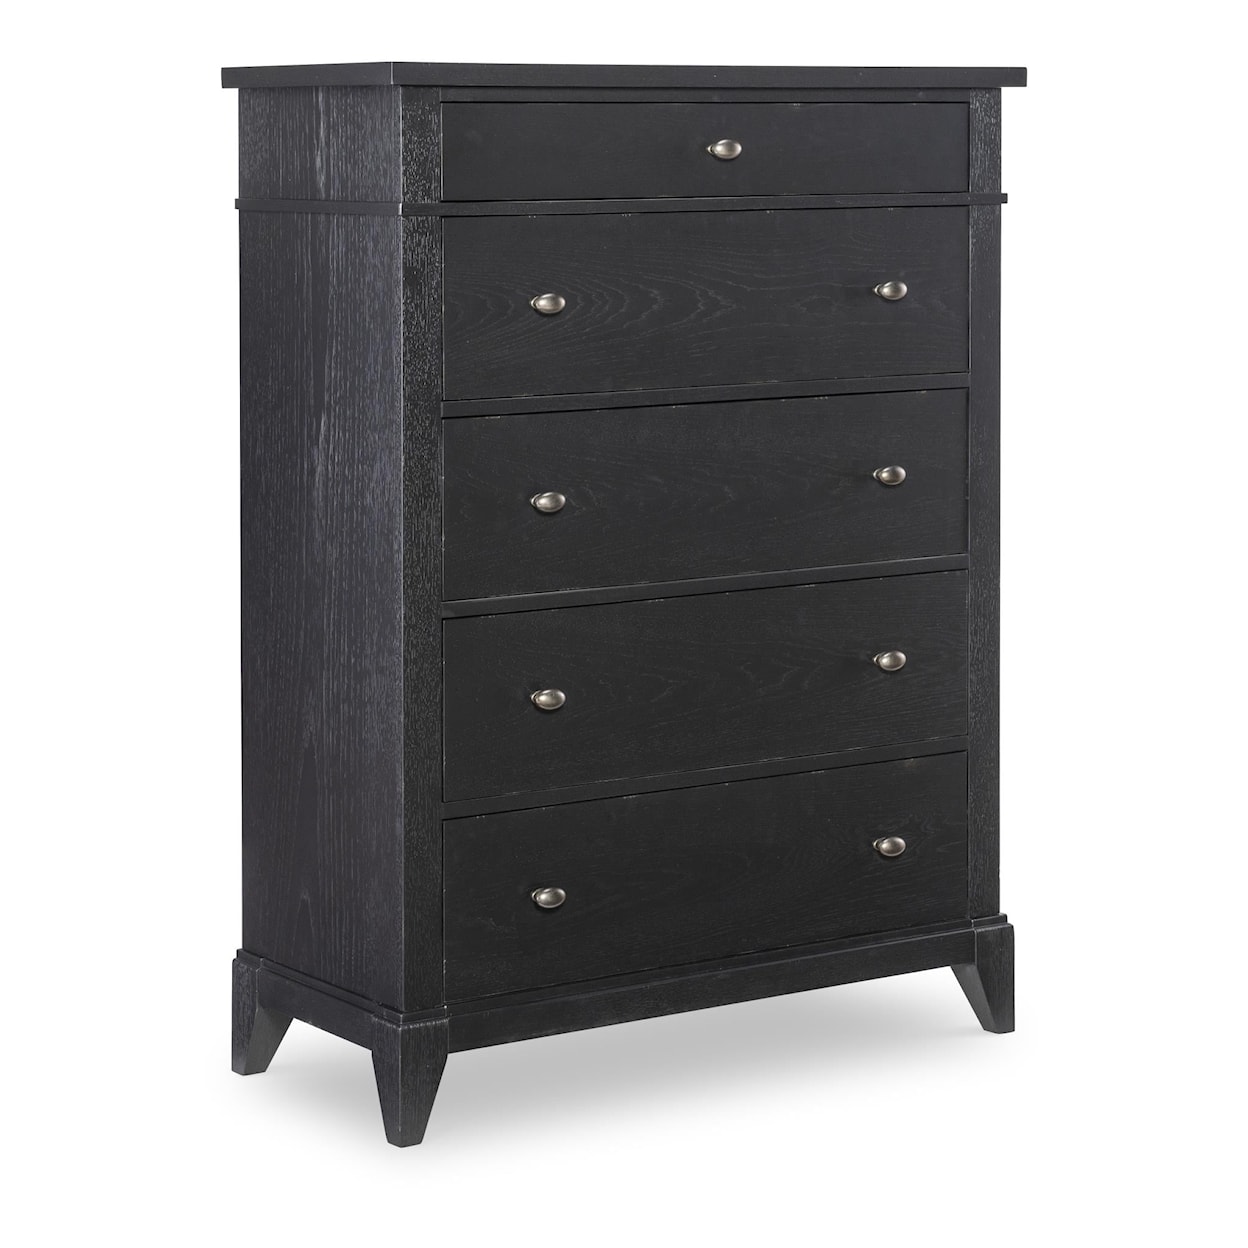 Trisha Yearwood Home Collection by Legacy Classic Today's Traditions Bedroom Drawer Chest